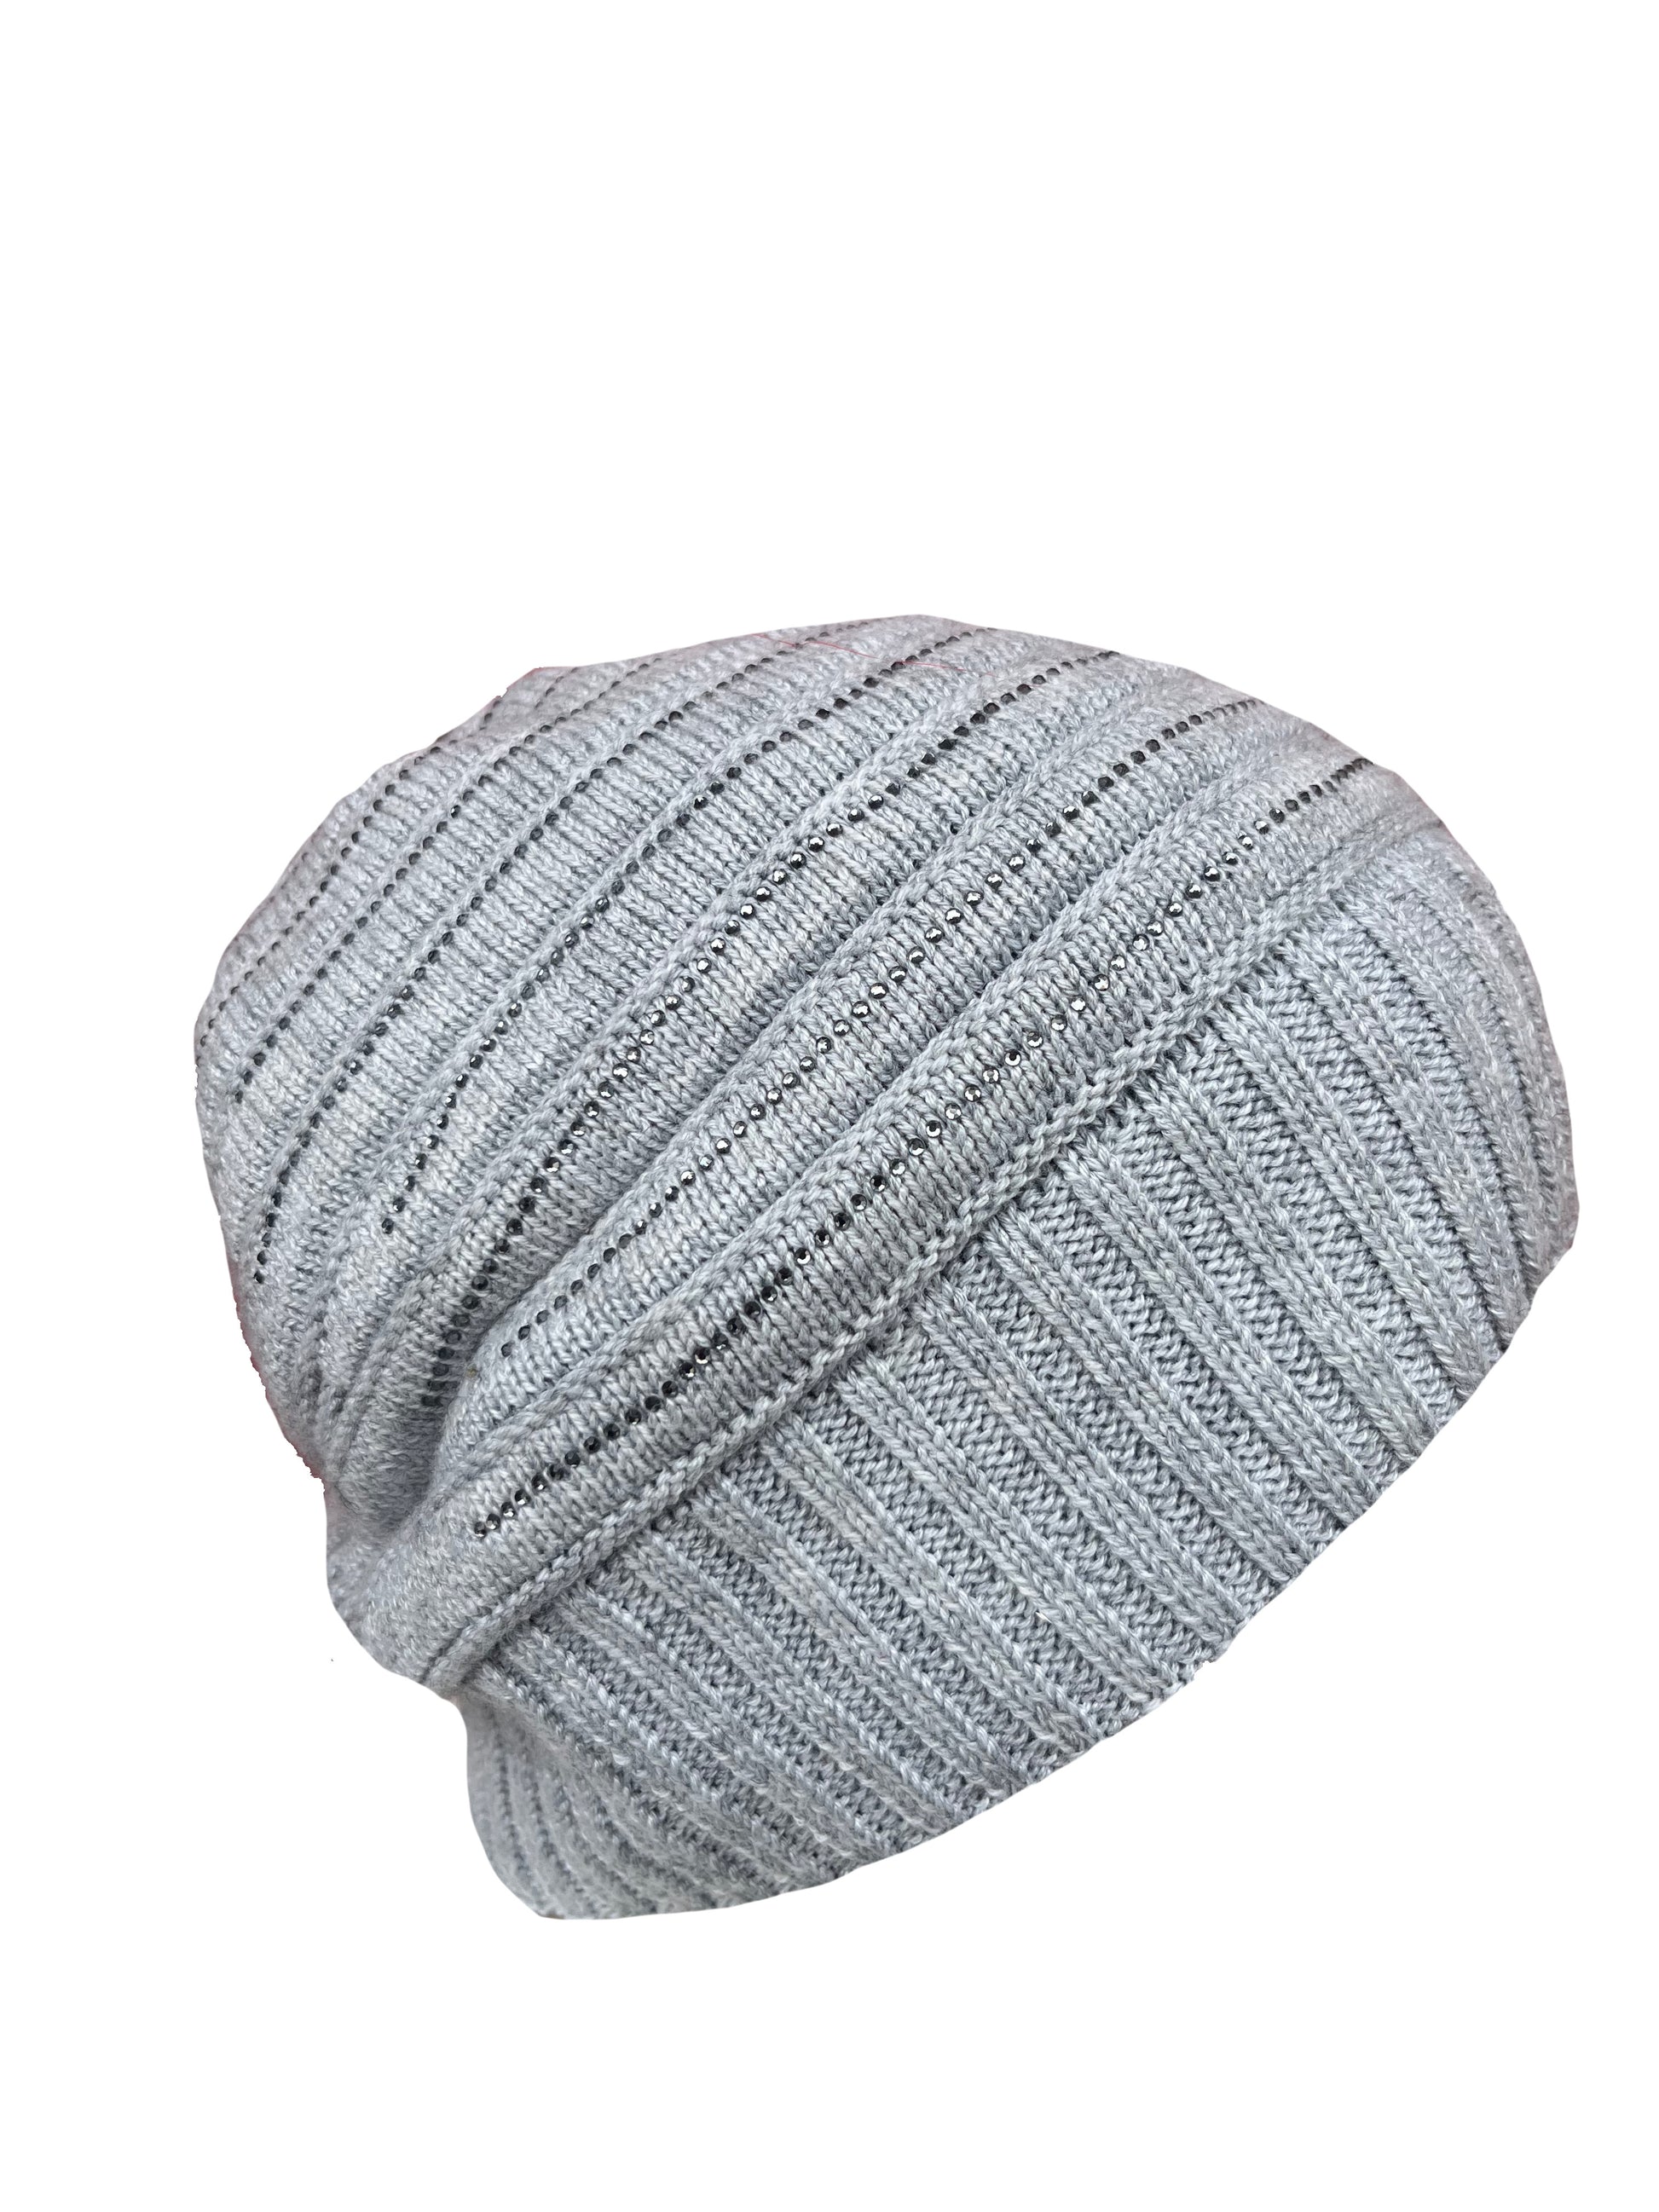 Knitting Pattern for Slouchy Beanie, slouchy beanie hat knitting pattern, slouch beanie, mens crochet slouchy beanie pattern,